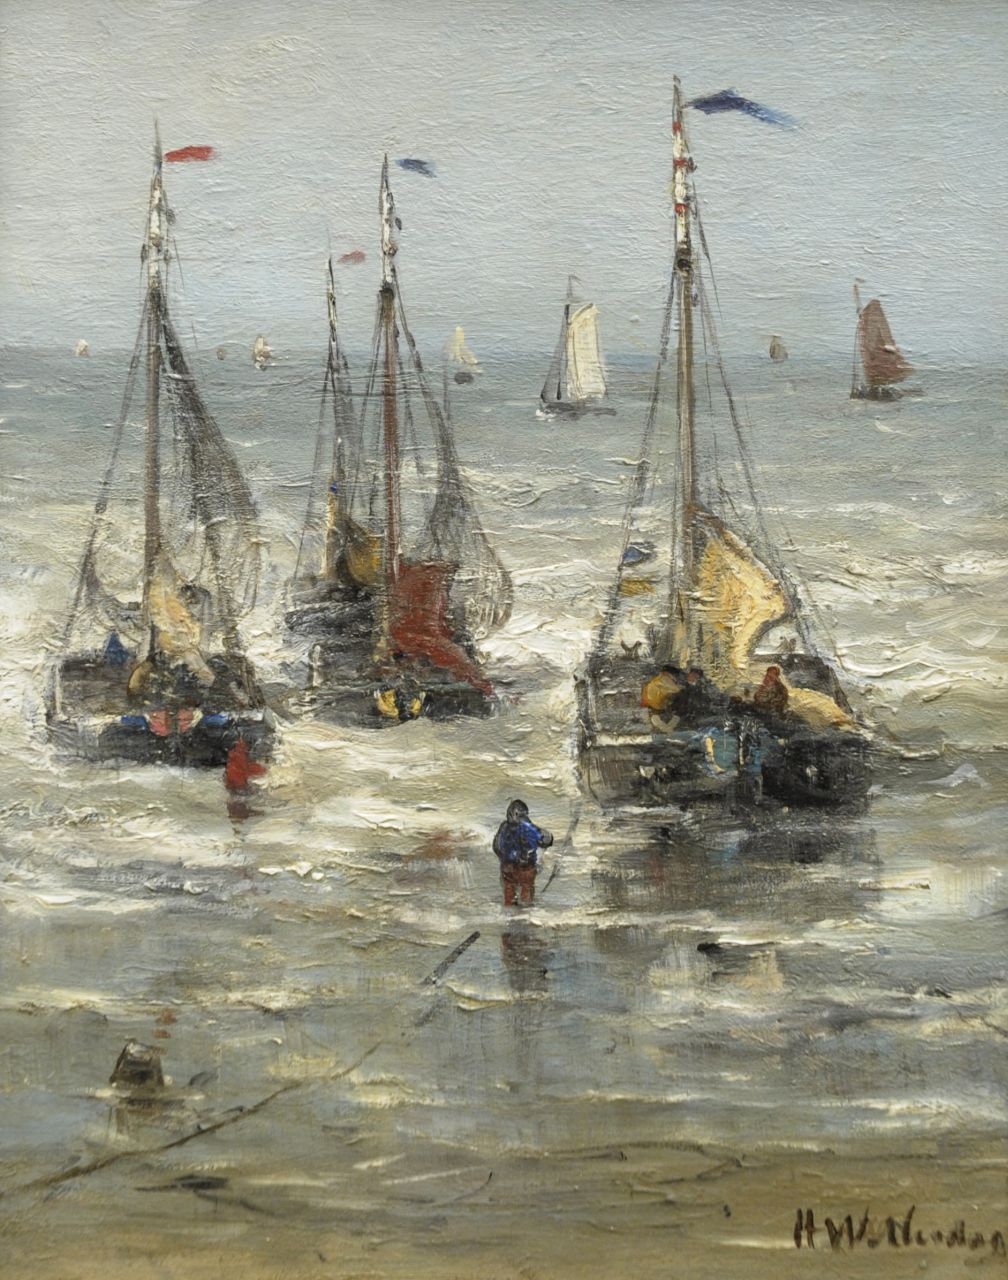 Mesdag H.W.  | Hendrik Willem Mesdag, Sailing out to sea, oil on panel 30.0 x 24.8 cm, signed l.r.